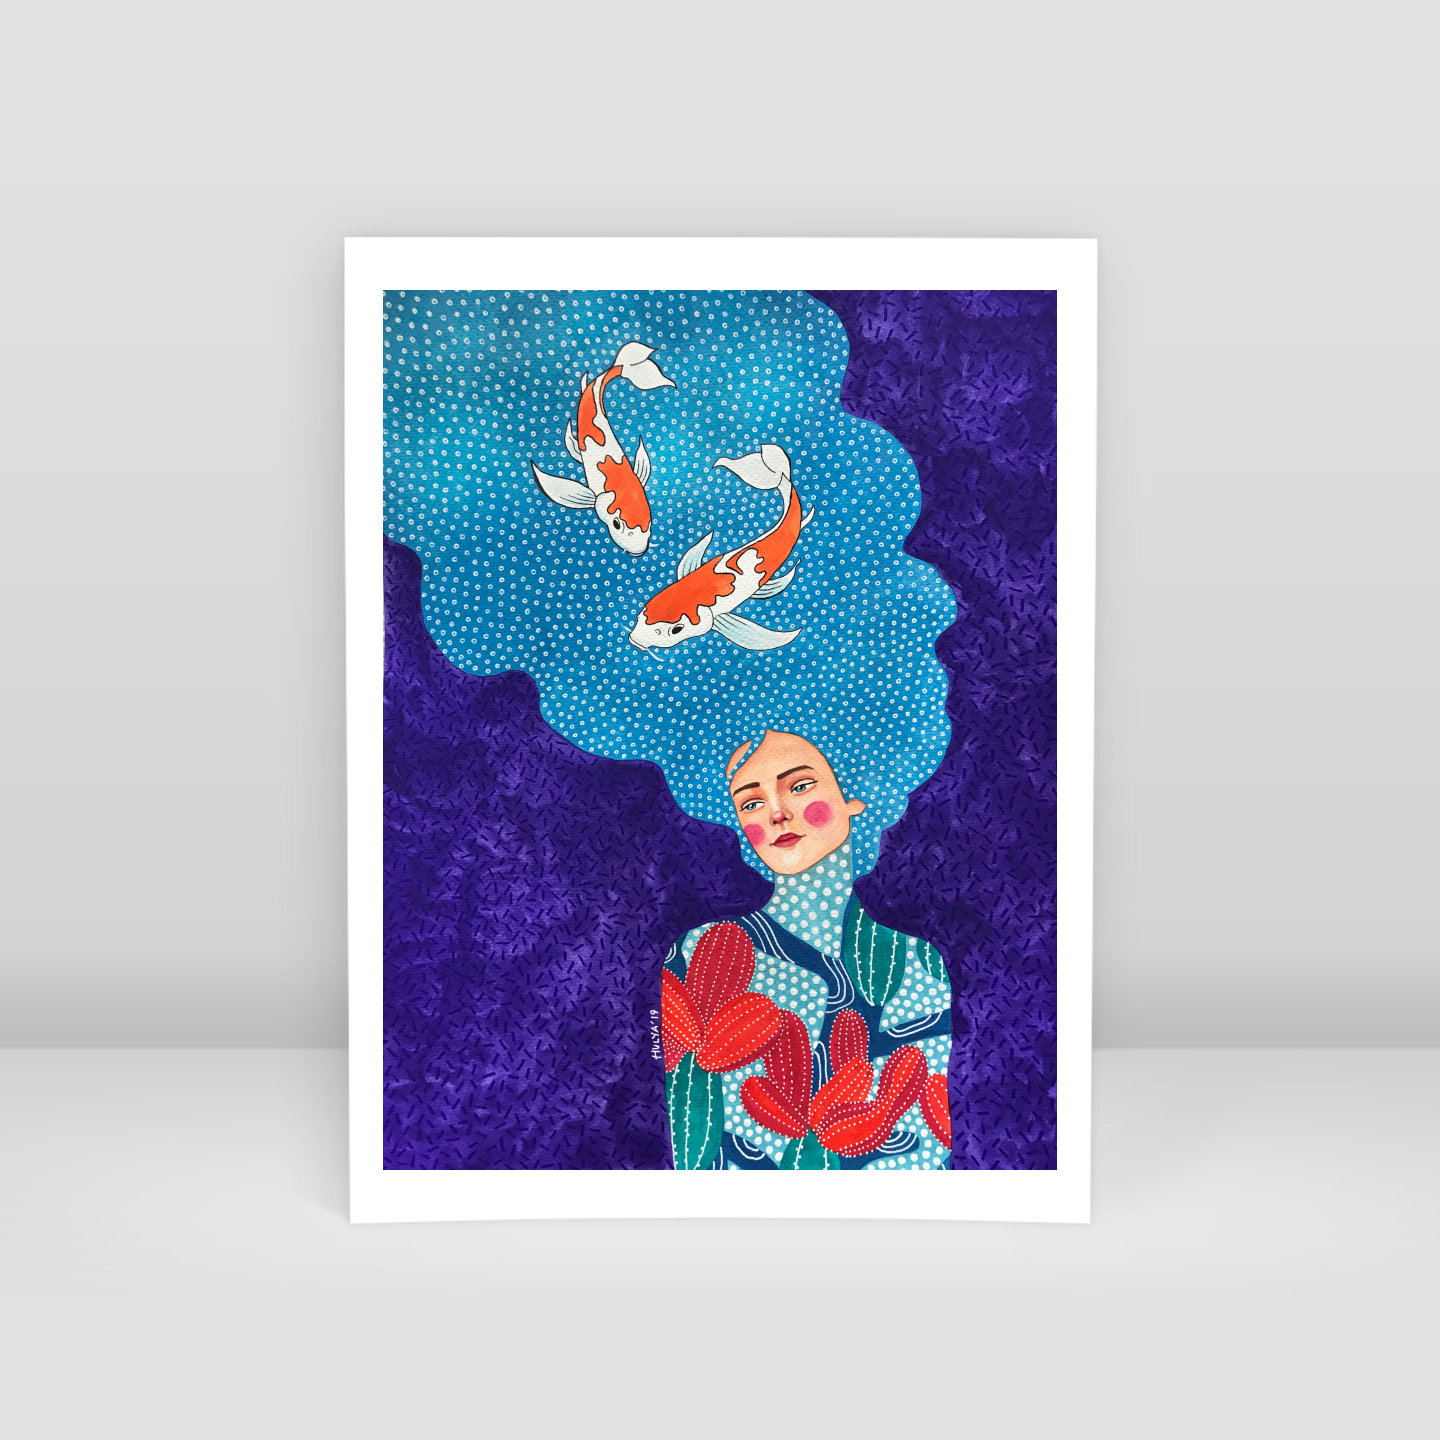 giving me a reason to stay - Art Print